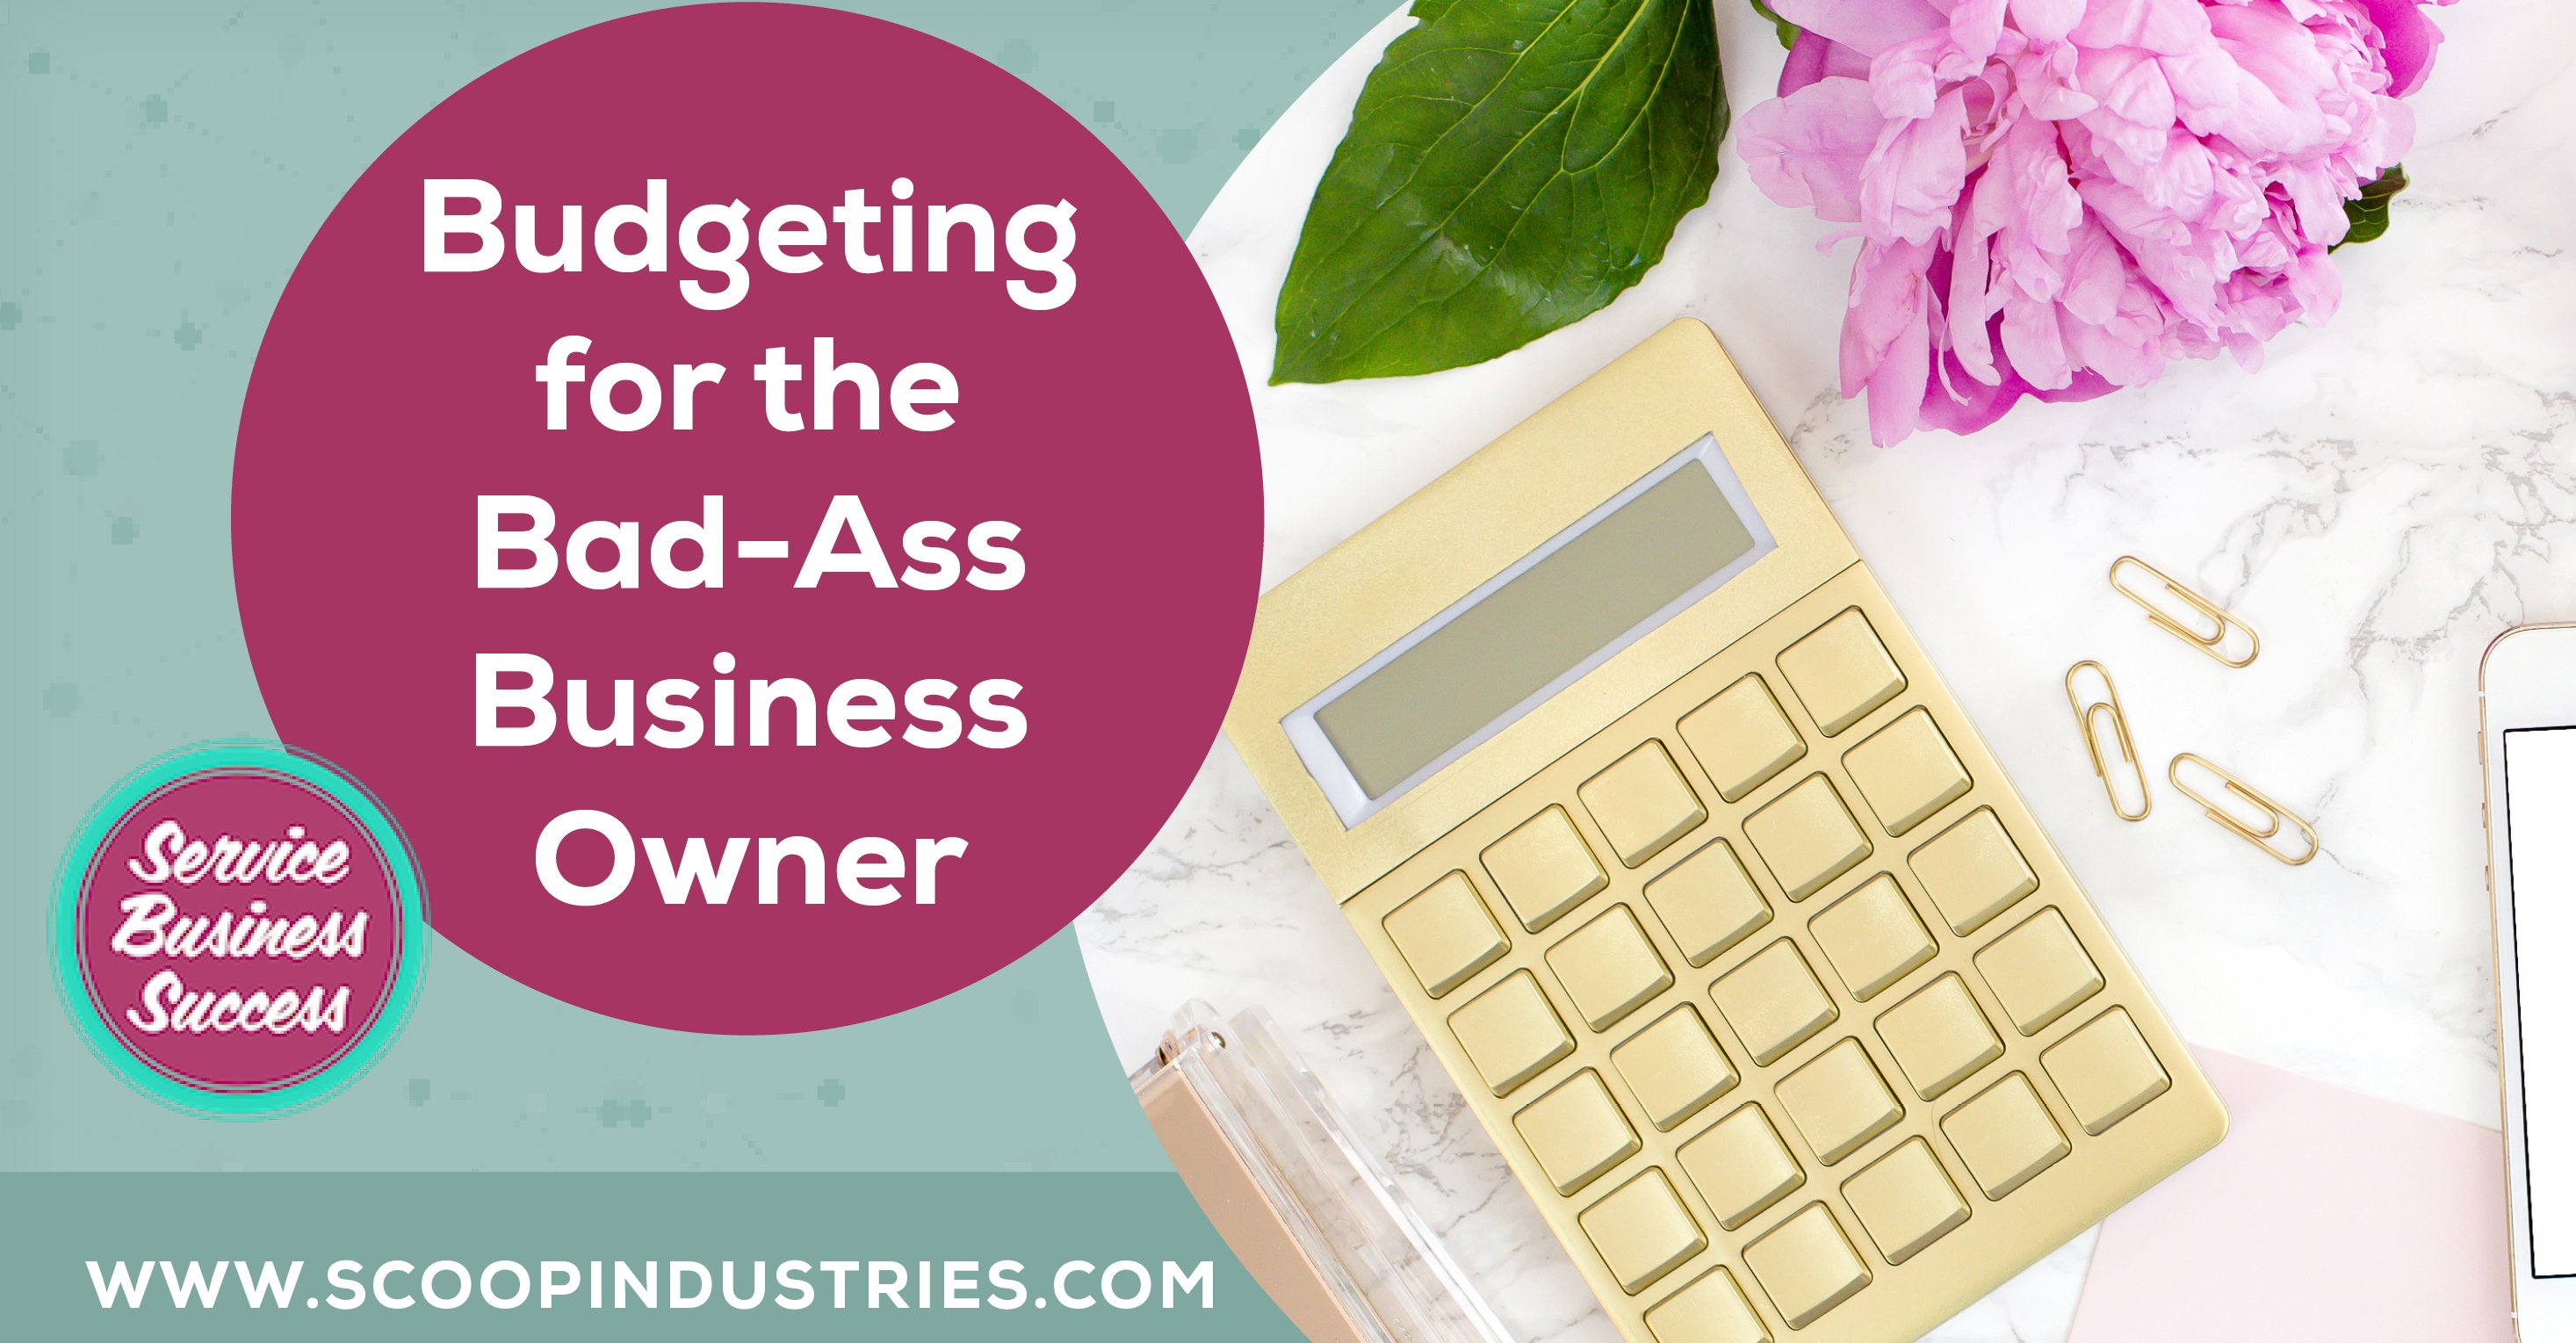 Budgeting. While it’s not a very glamorous task, it’s something every entrepreneur needs to master. Knowing where to start, what to include and how often it should be tweaked is half the battle, so in this episode we’re breaking down our best tips on budgeting for the bad ass business owner.